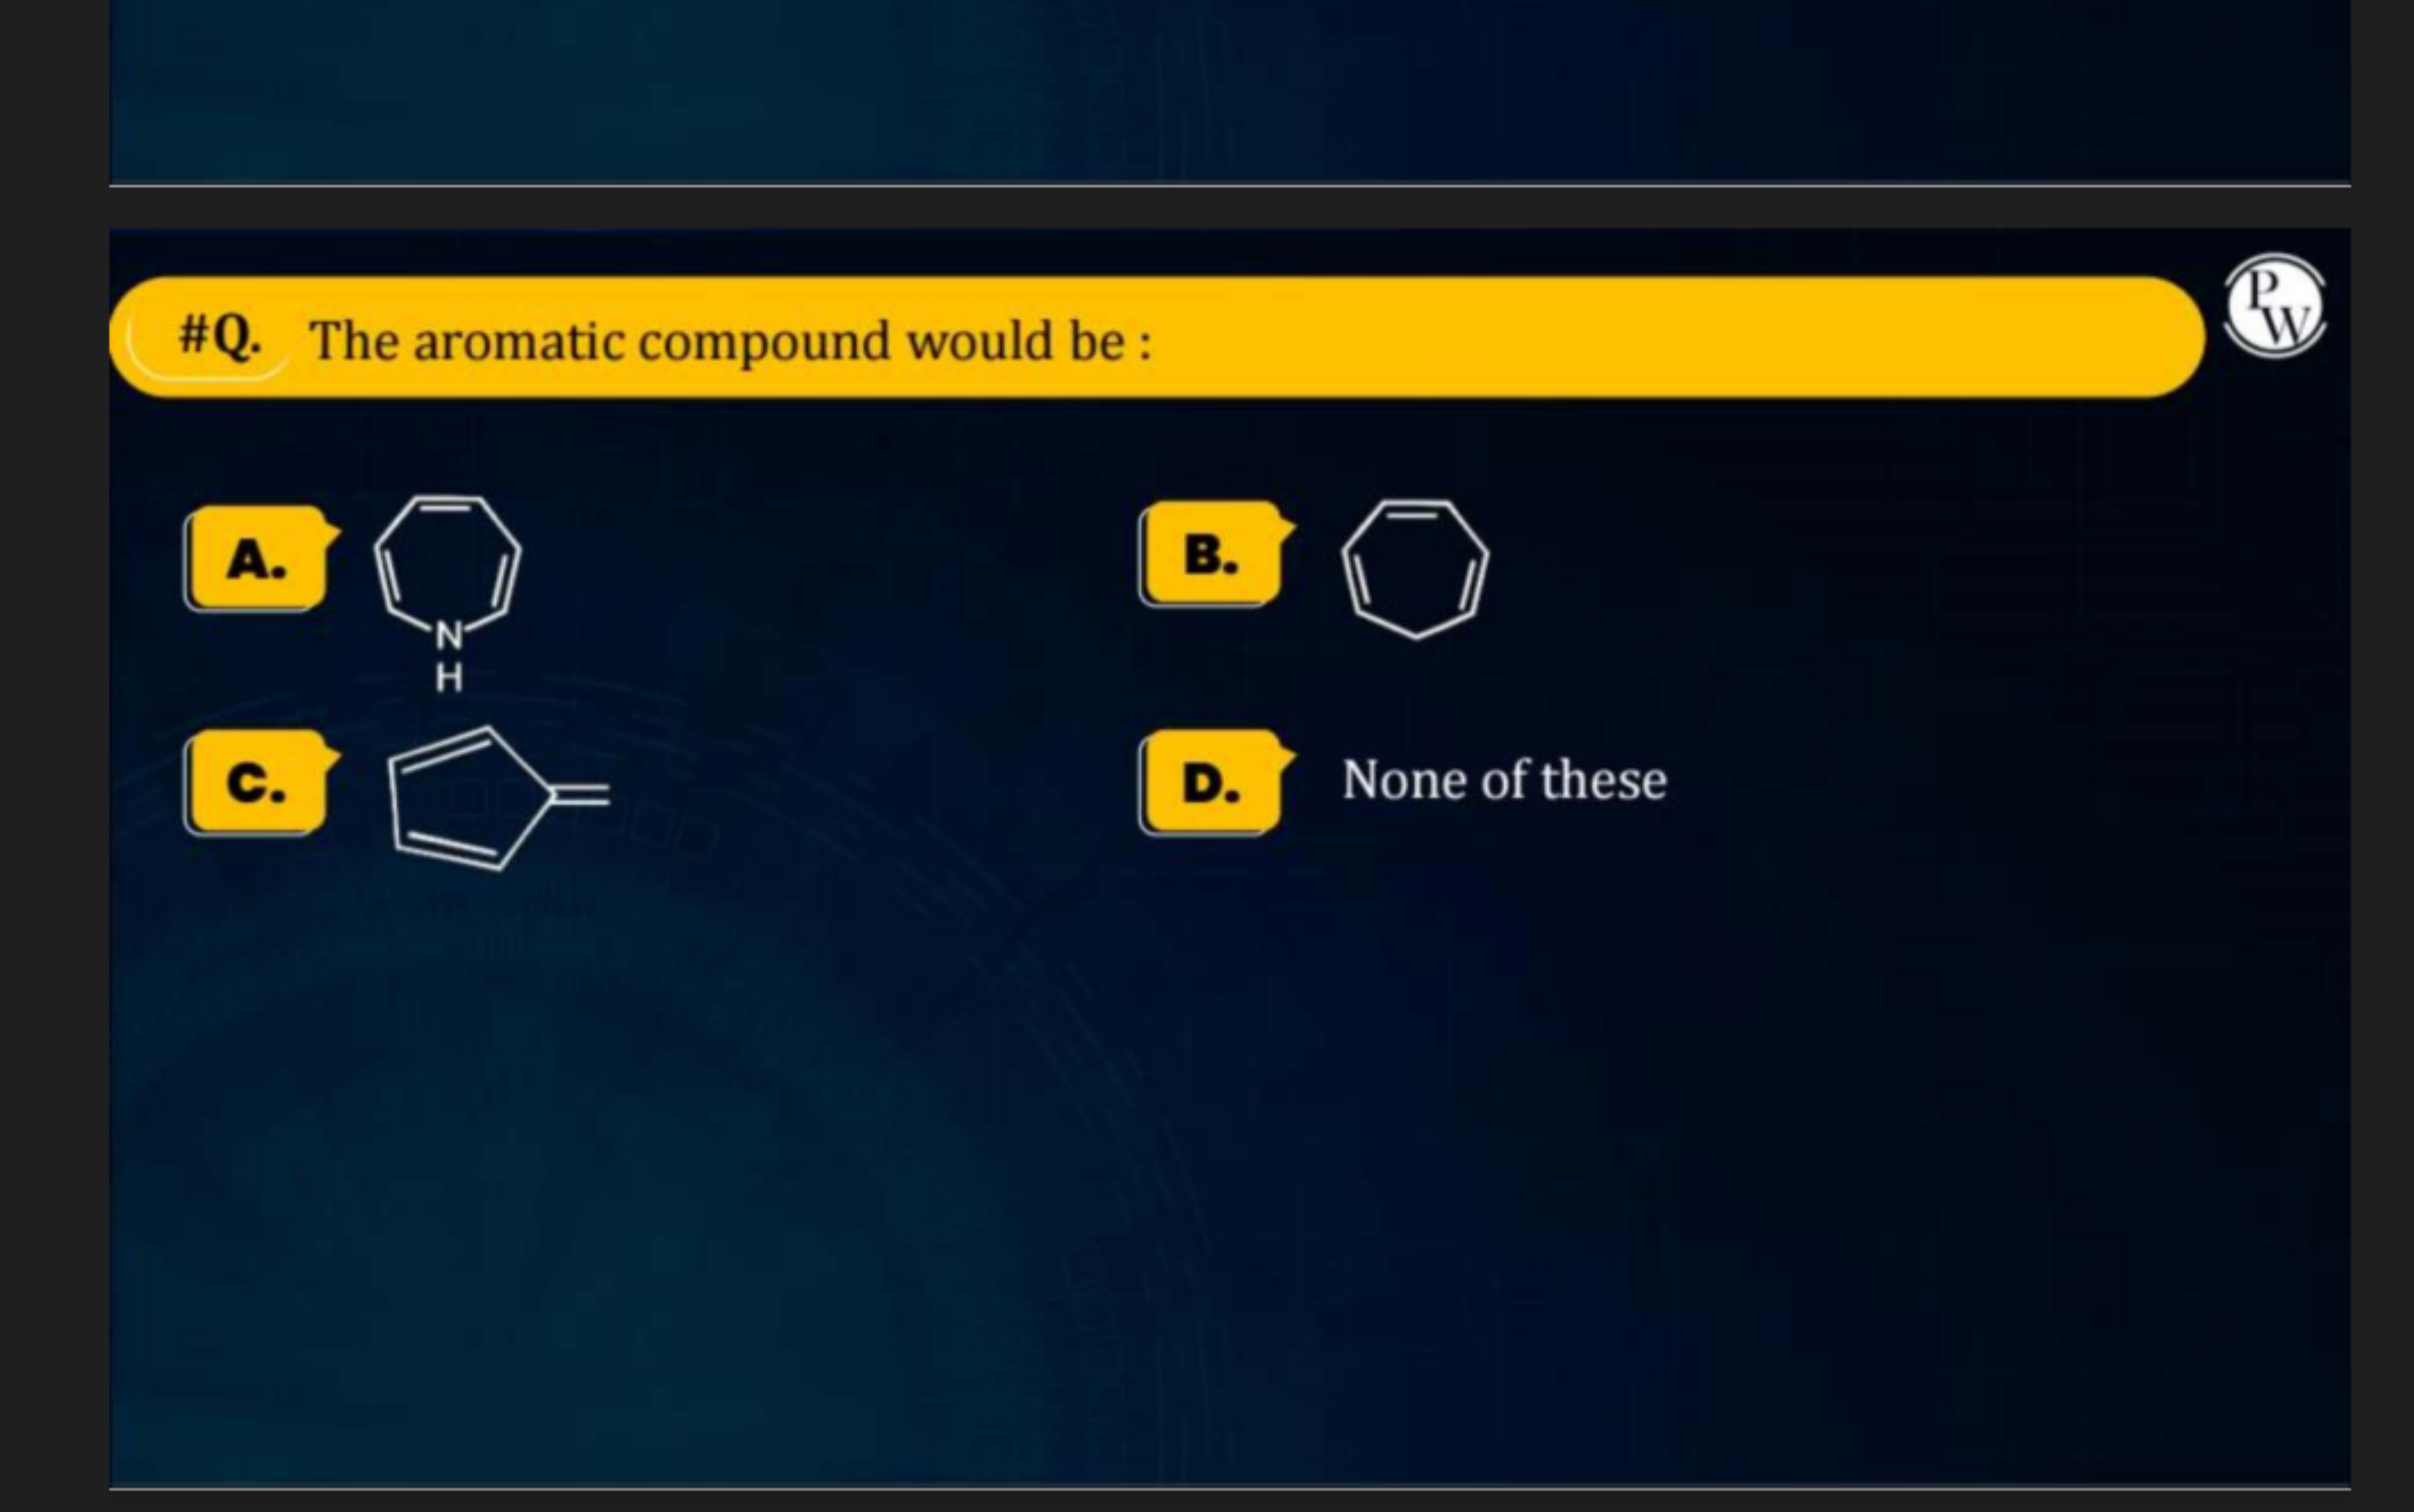 \#Q. The aromatic compound would be :